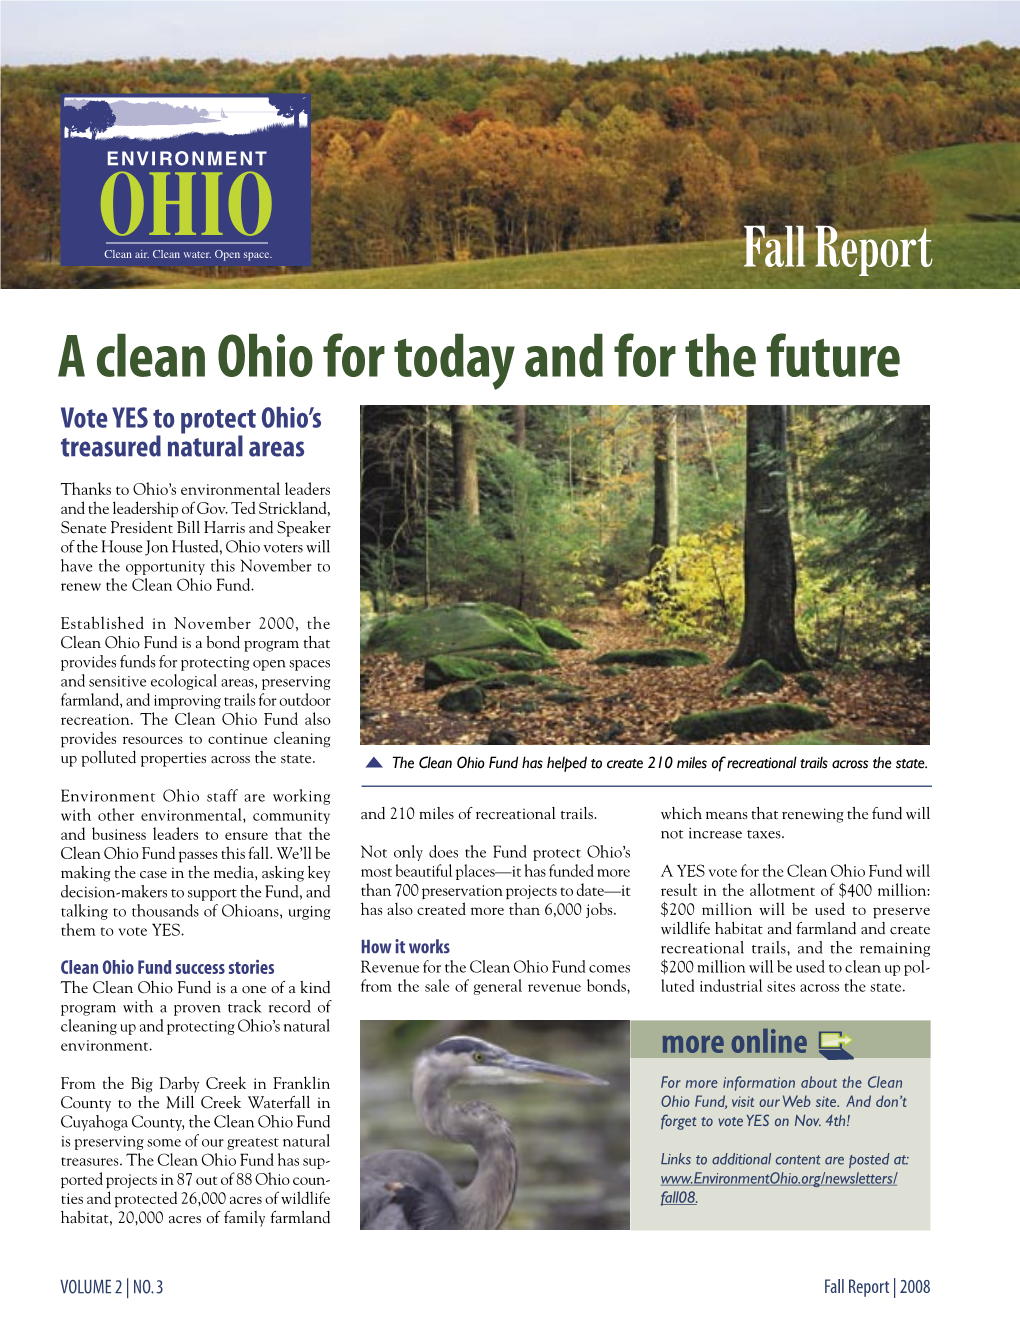 A Clean Ohio for Today and for the Future Vote YES to Protect Ohio’S Treasured Natural Areas